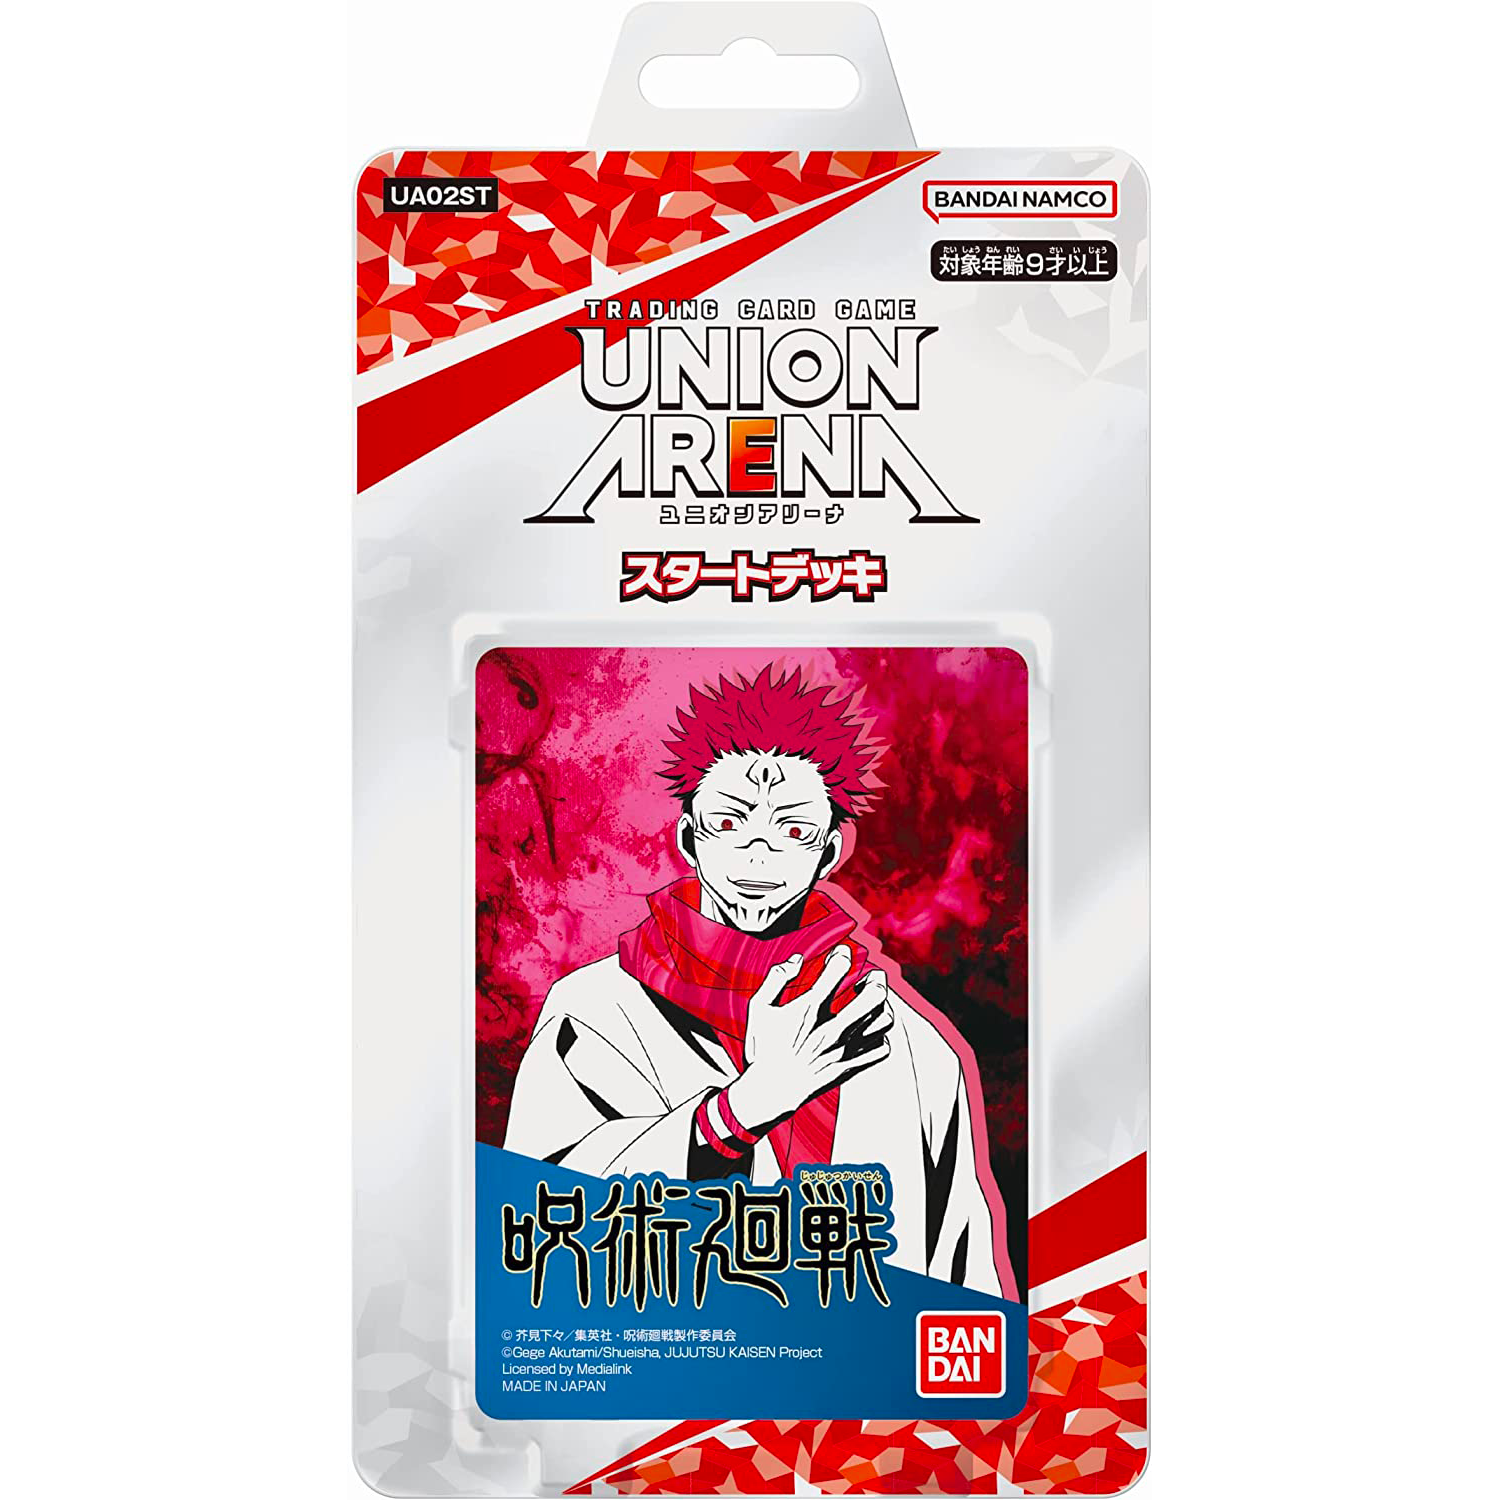 TRADING CARD GAME UNION ARENA STARTER DECK [UA02ST] JUJUTSU KAISEN  Release date: March 24 2023      Pre-constructed deck: 50 cards (18 types in total)     Action Point card: 3 pieces     Play sheet: 1 sheet